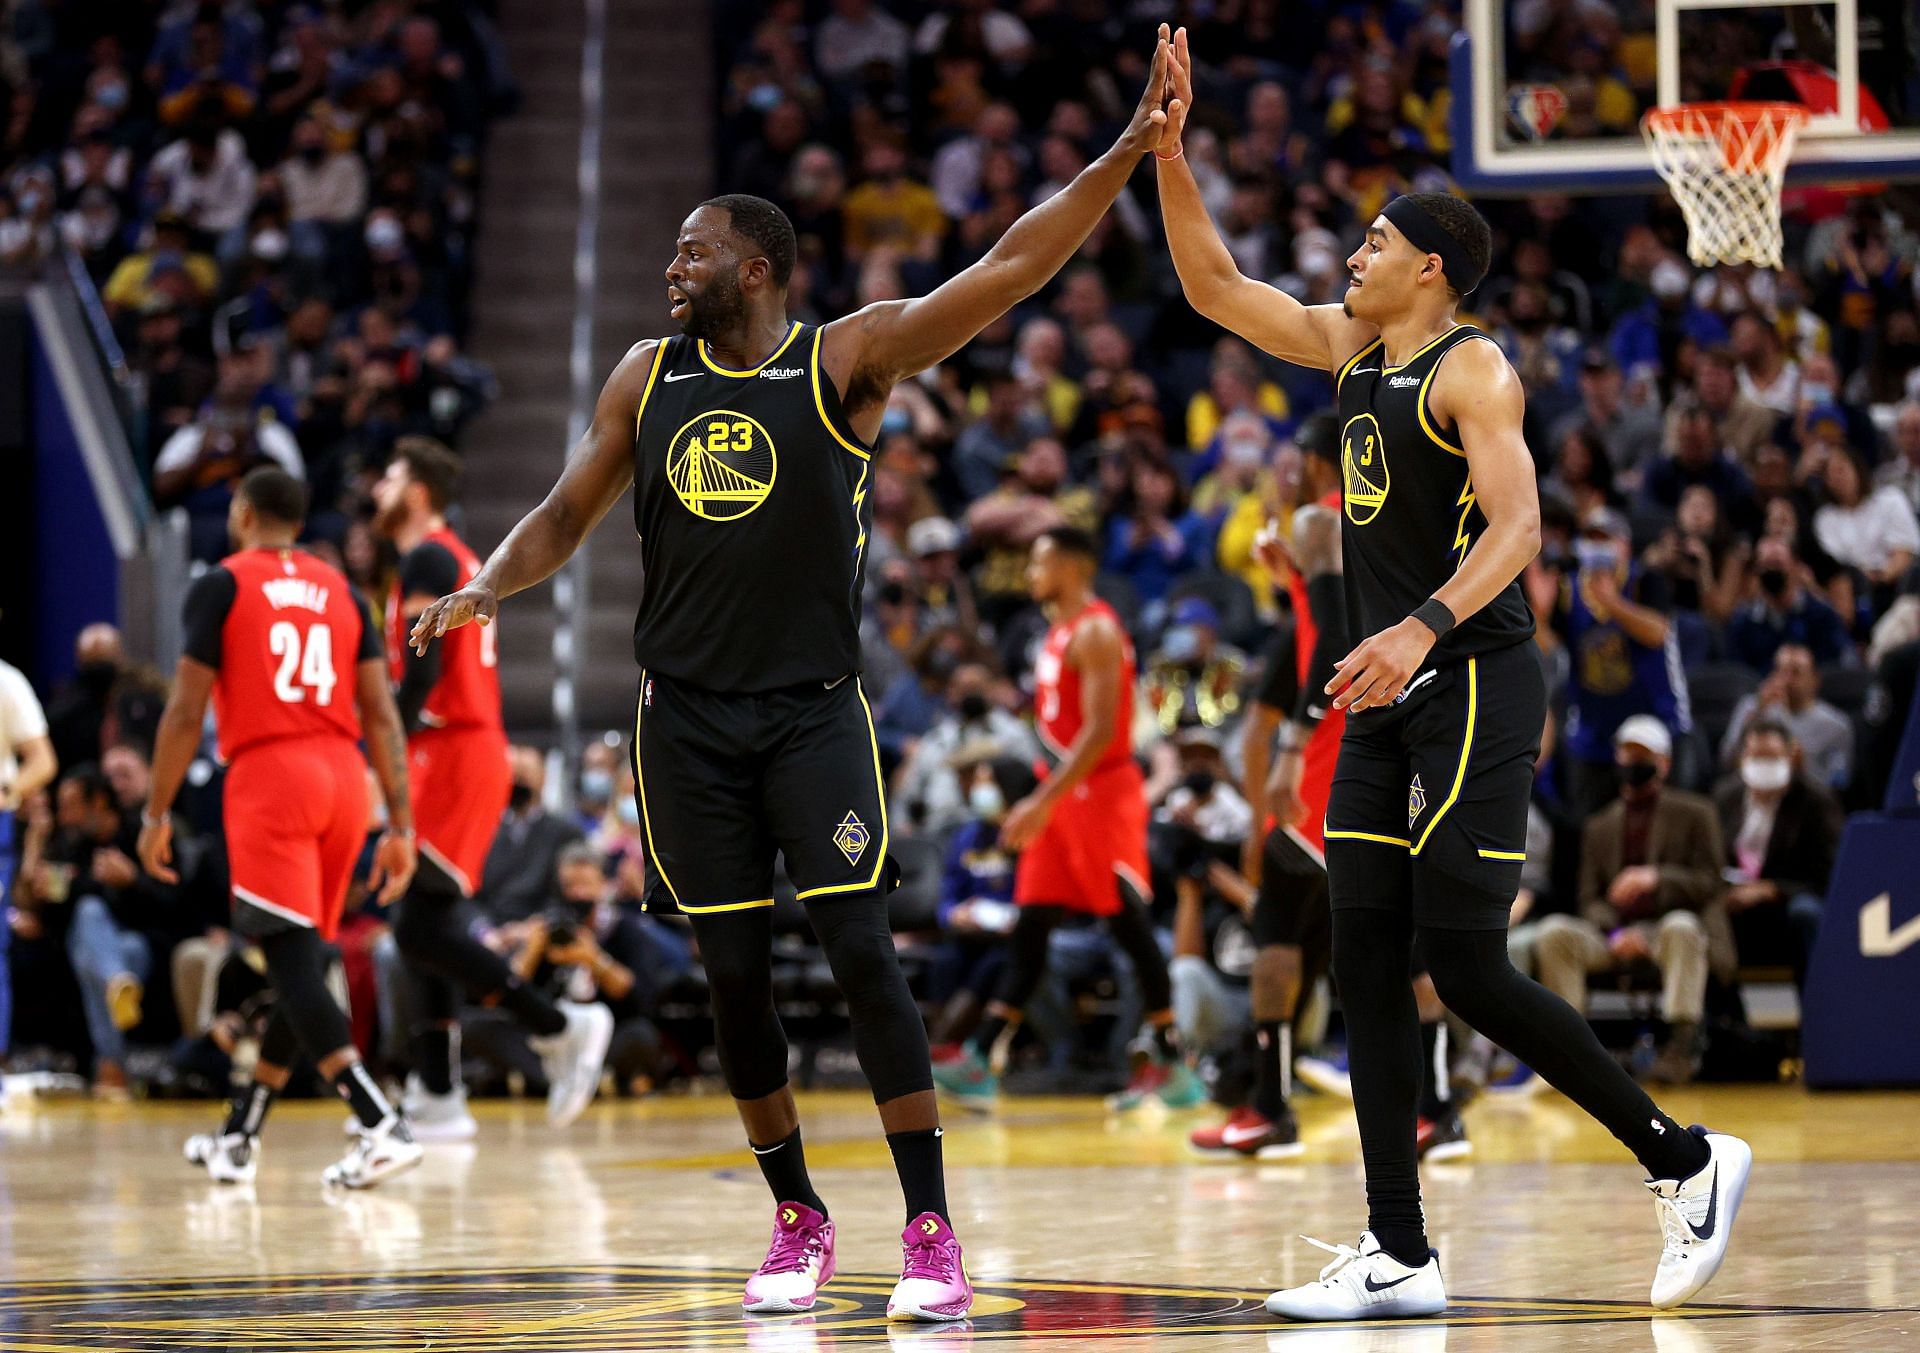 Draymond Green No. 23 and Jordan Poole No. 3 of the Golden State Warriors.